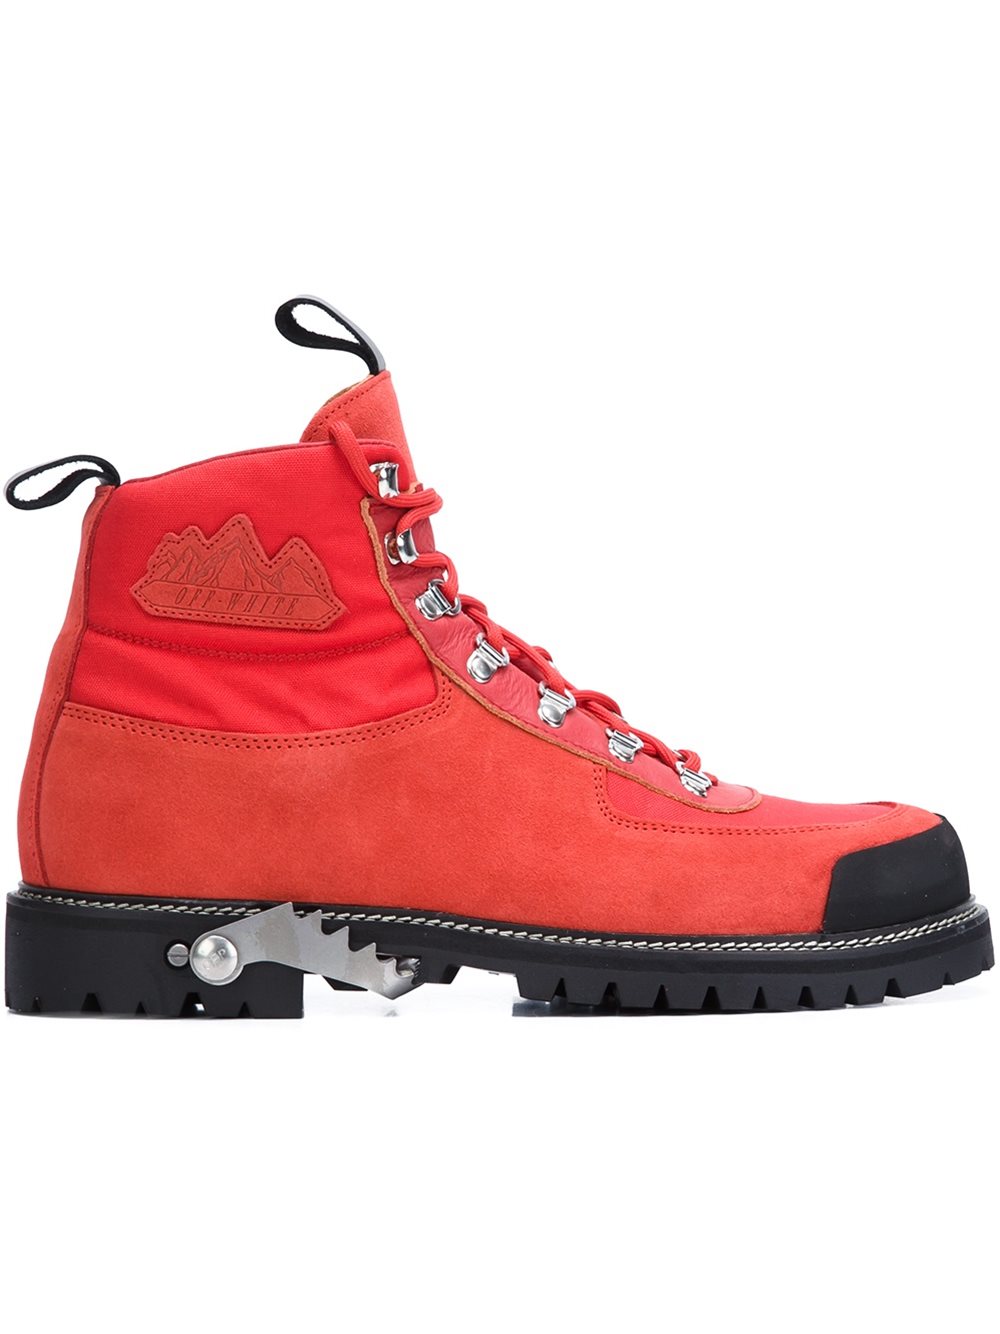 Off-White 'King Cordura' boots Red/Red Men Shoes